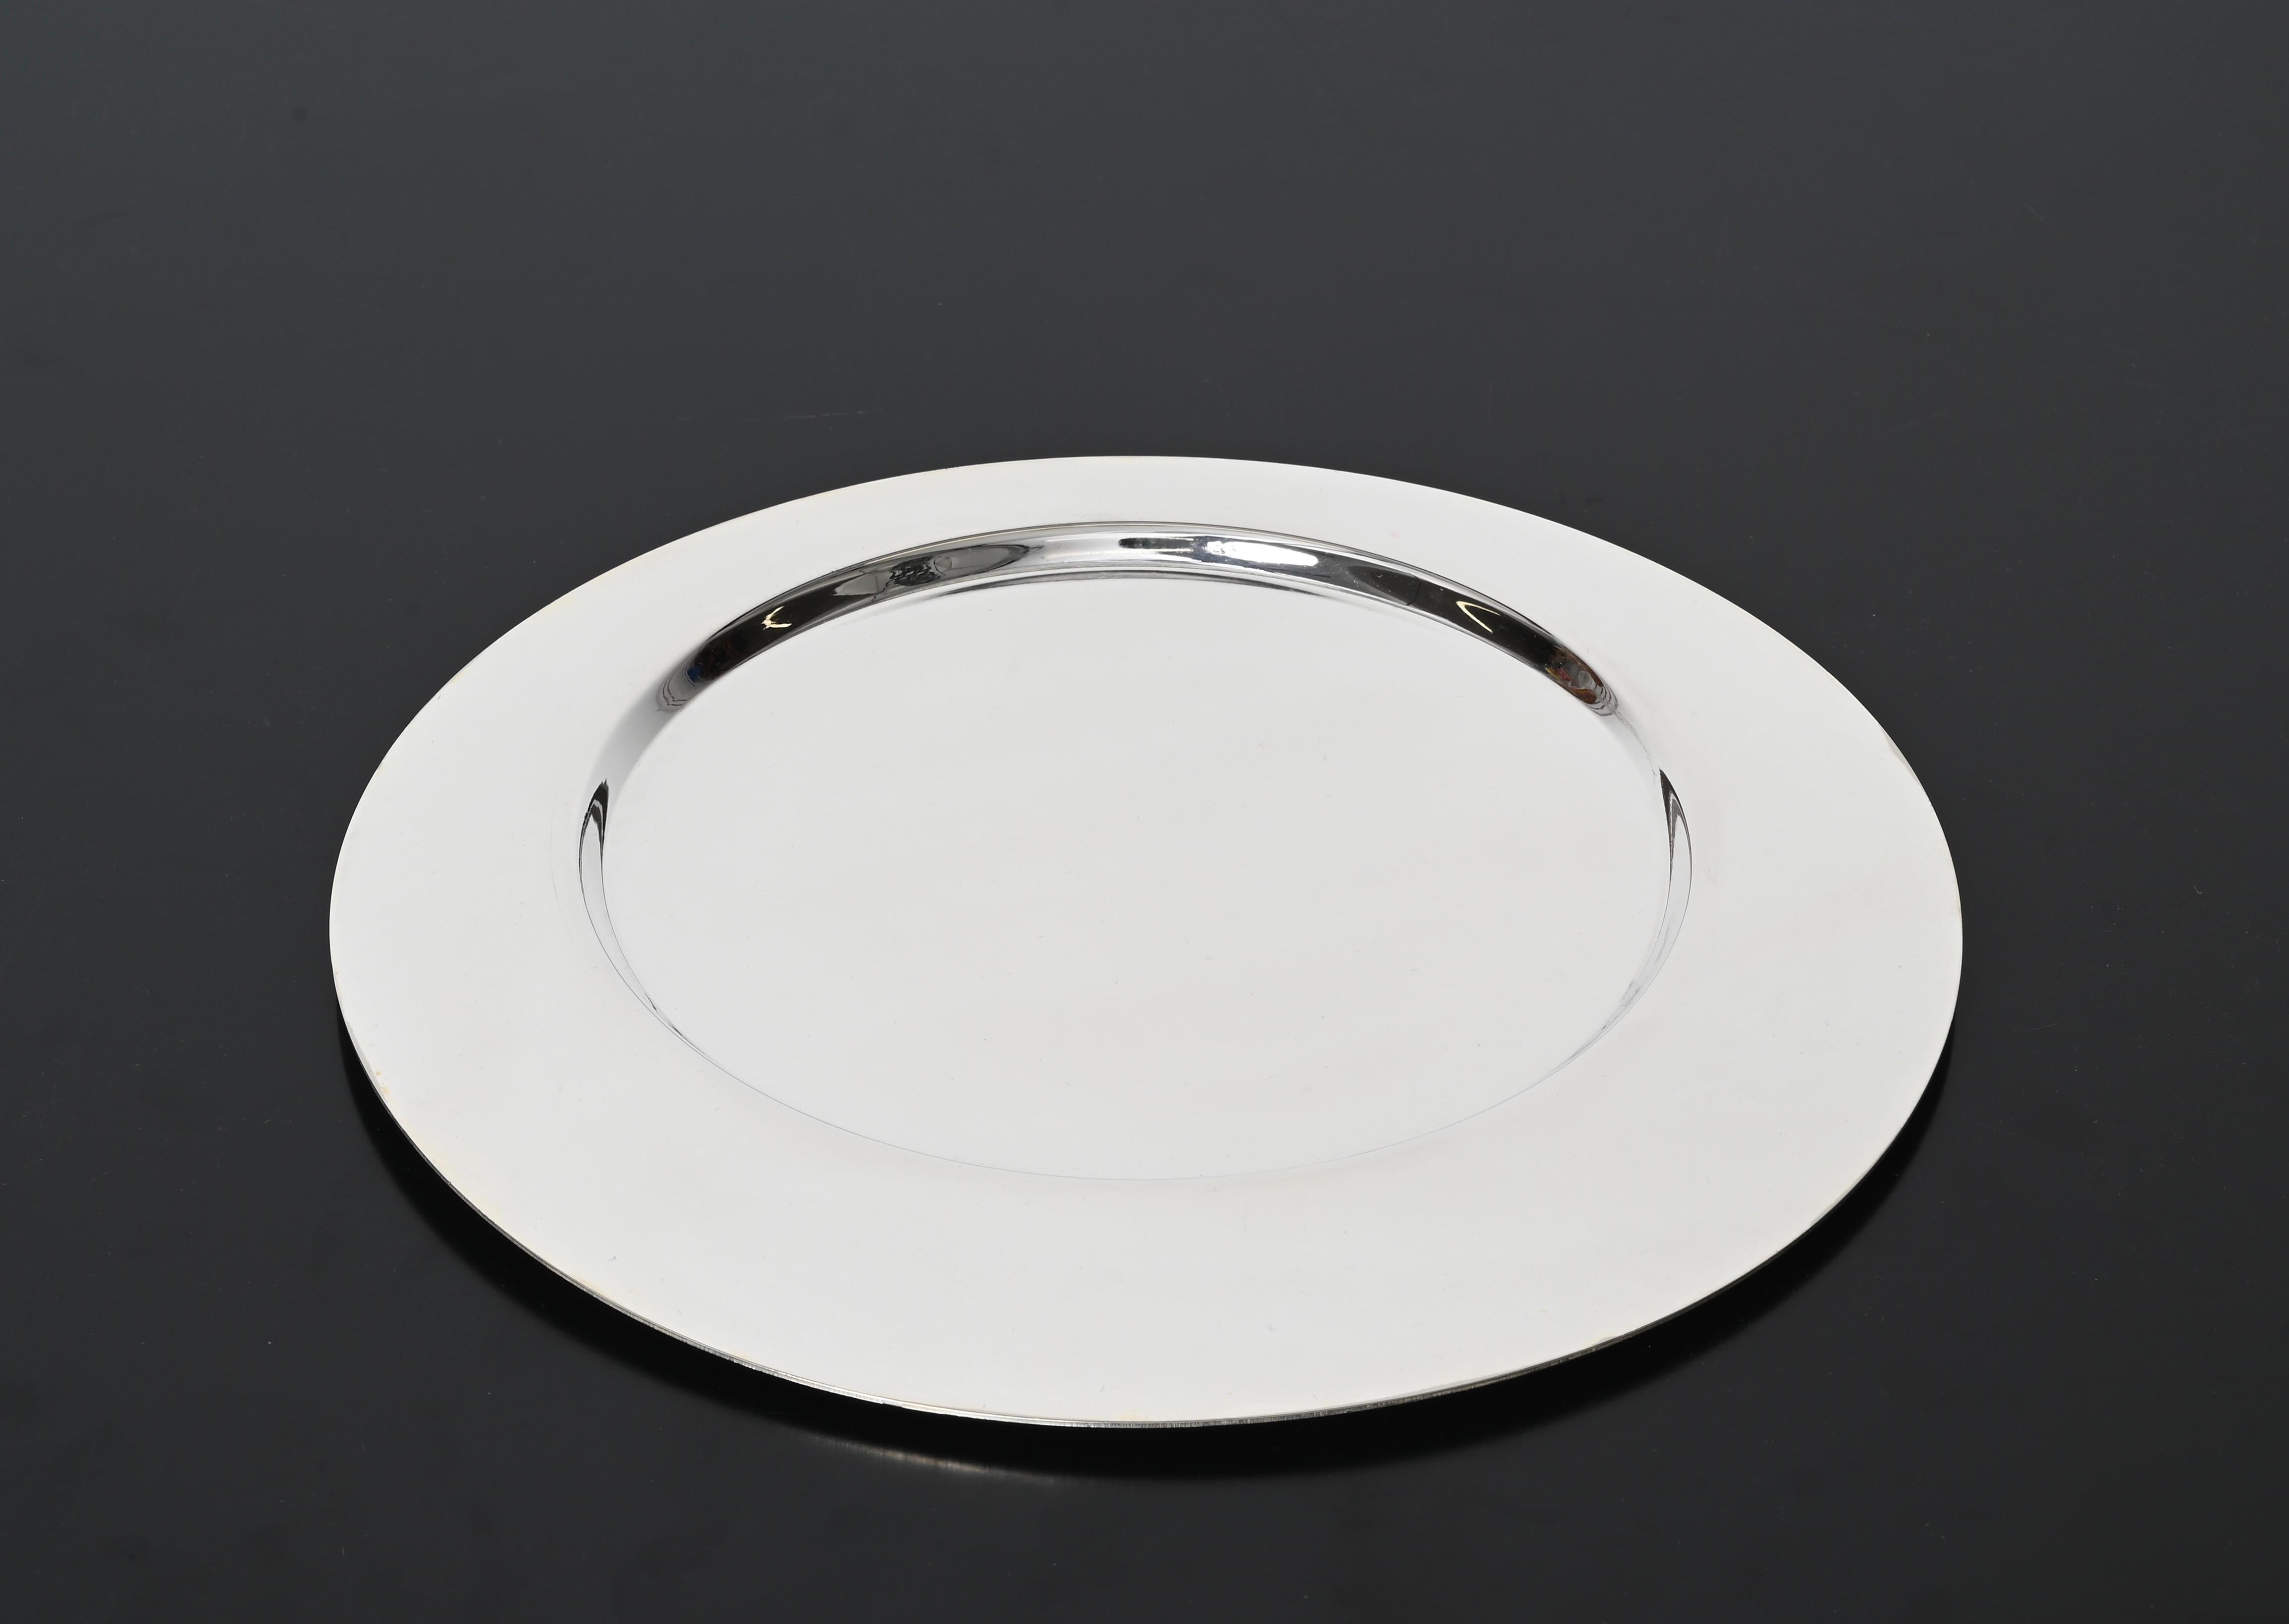 Gio Ponti for Cleto Munari Modernist Silver Plated Serving Plate Italy, 1980s For Sale 1